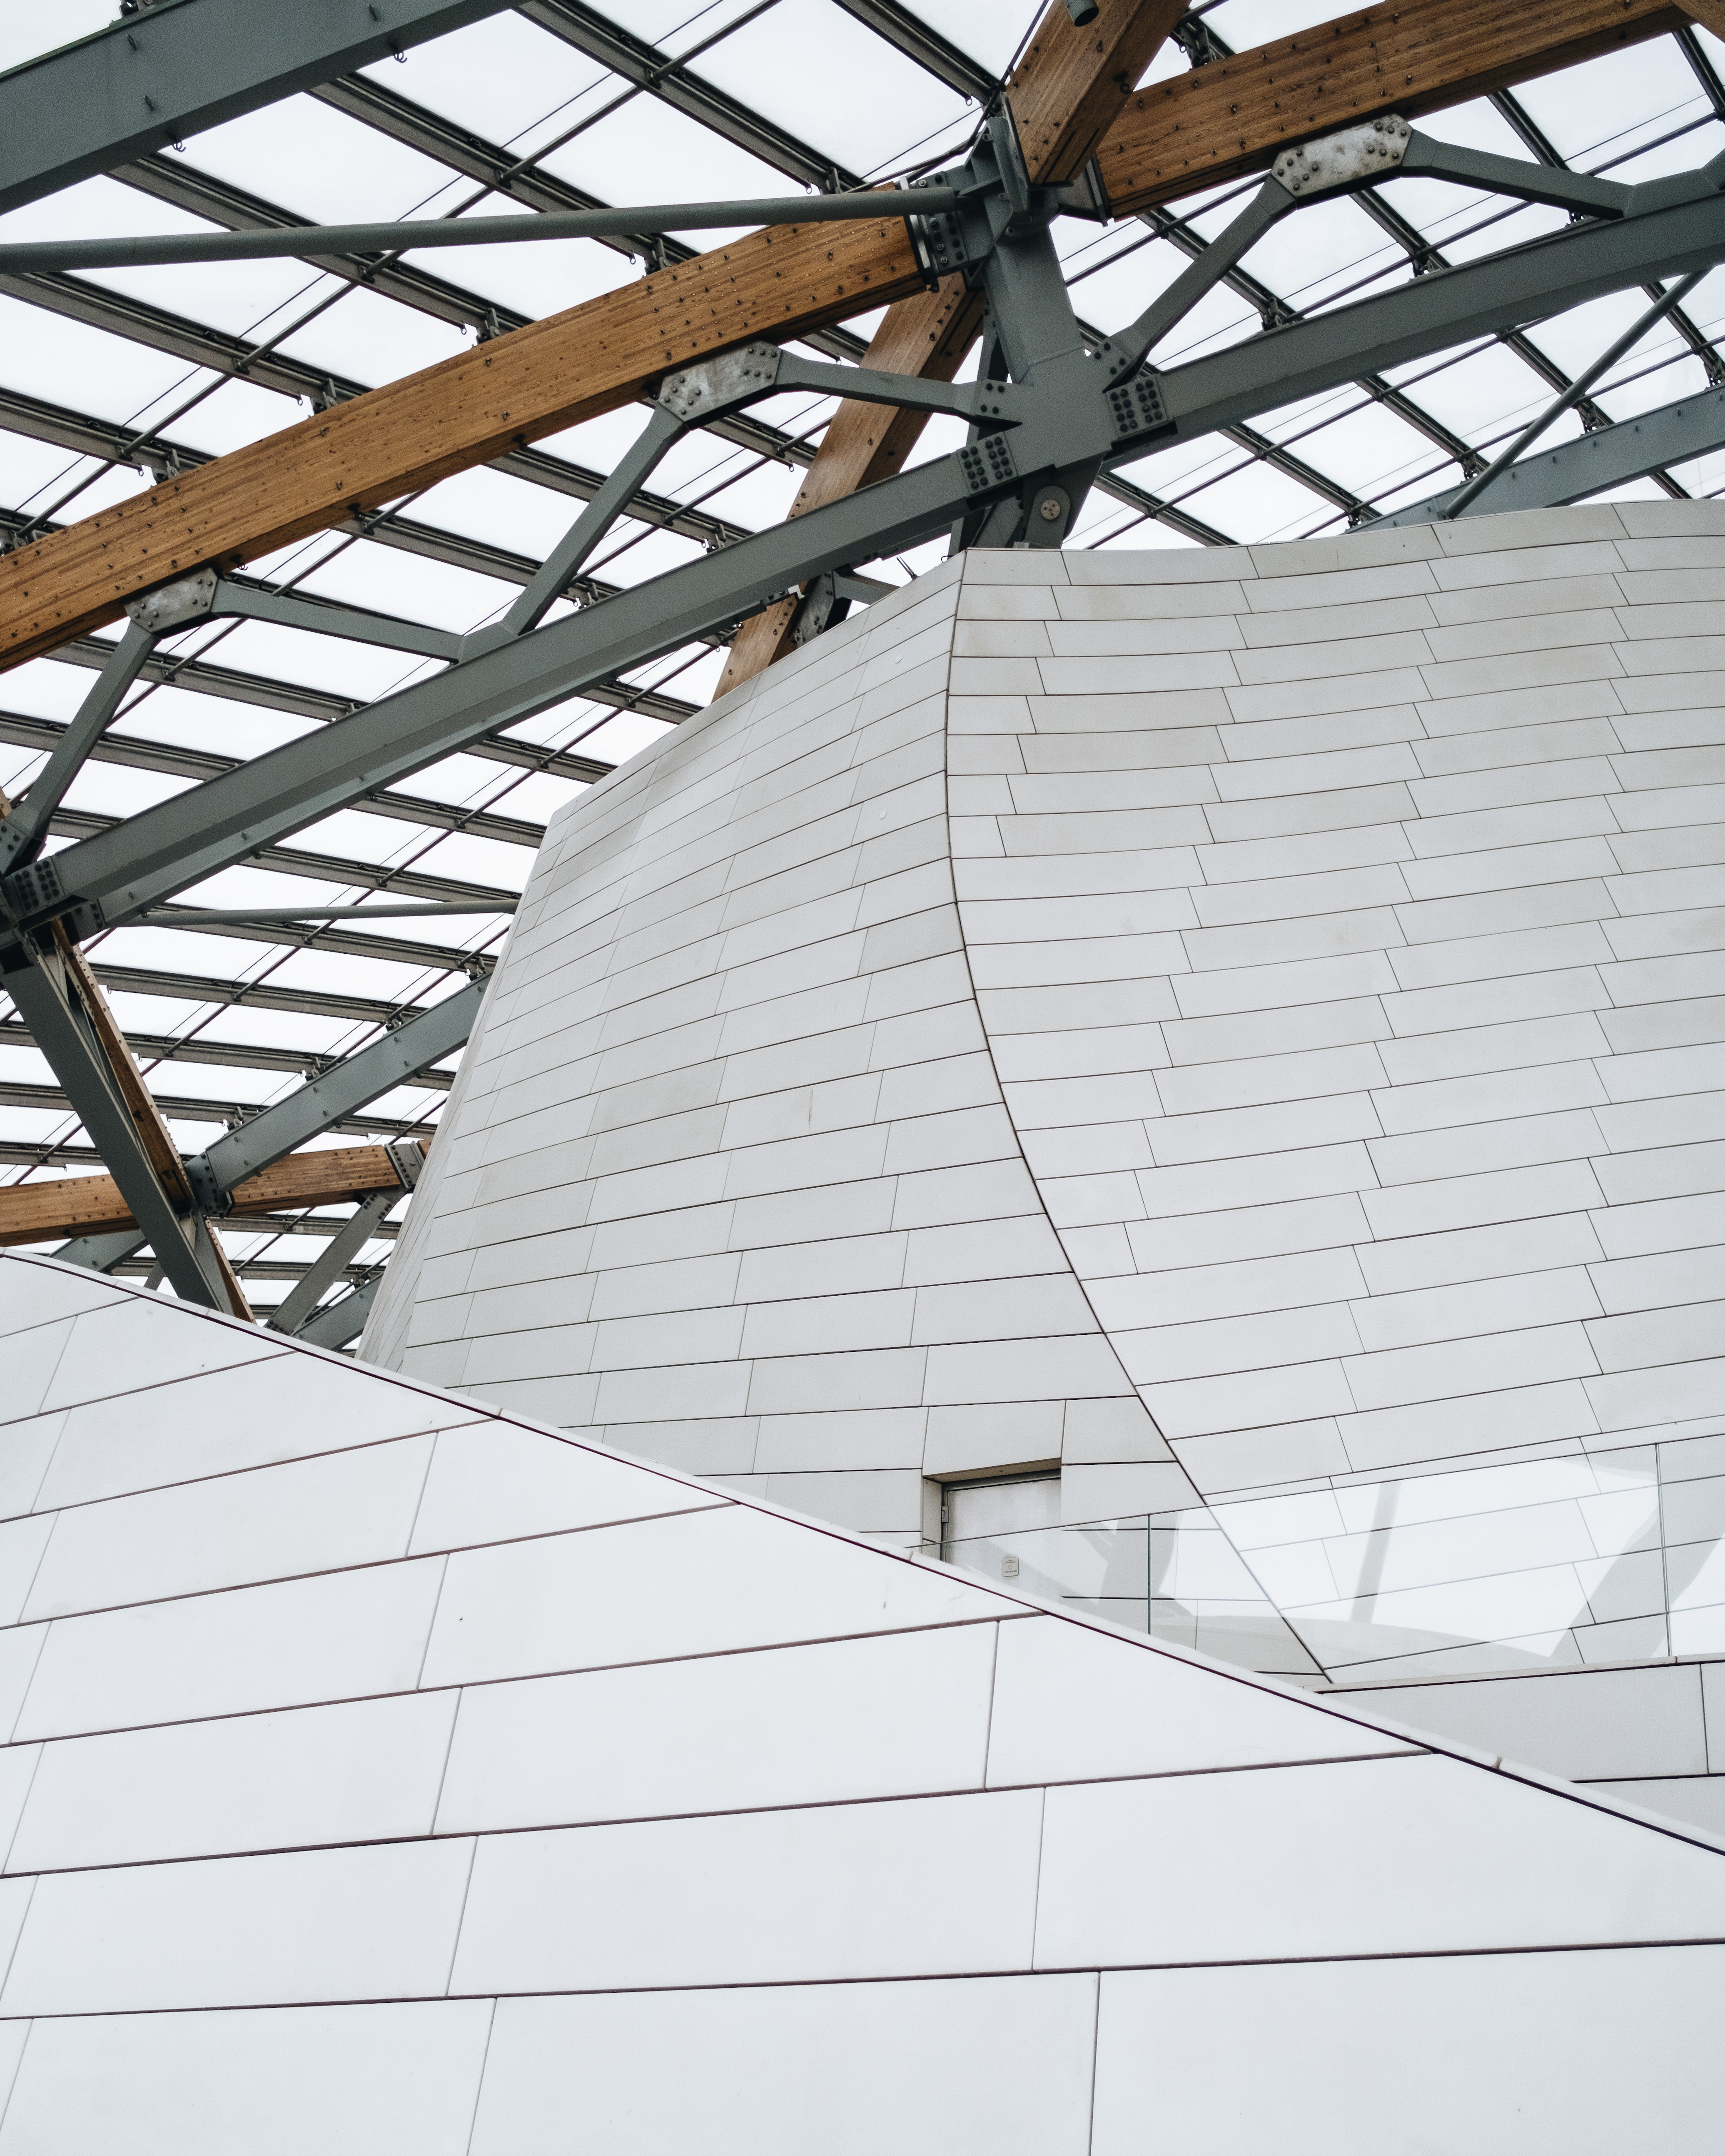 Louis Vuitton Foundation  Gehry architecture, Frank gehry architecture, Louis  vuitton